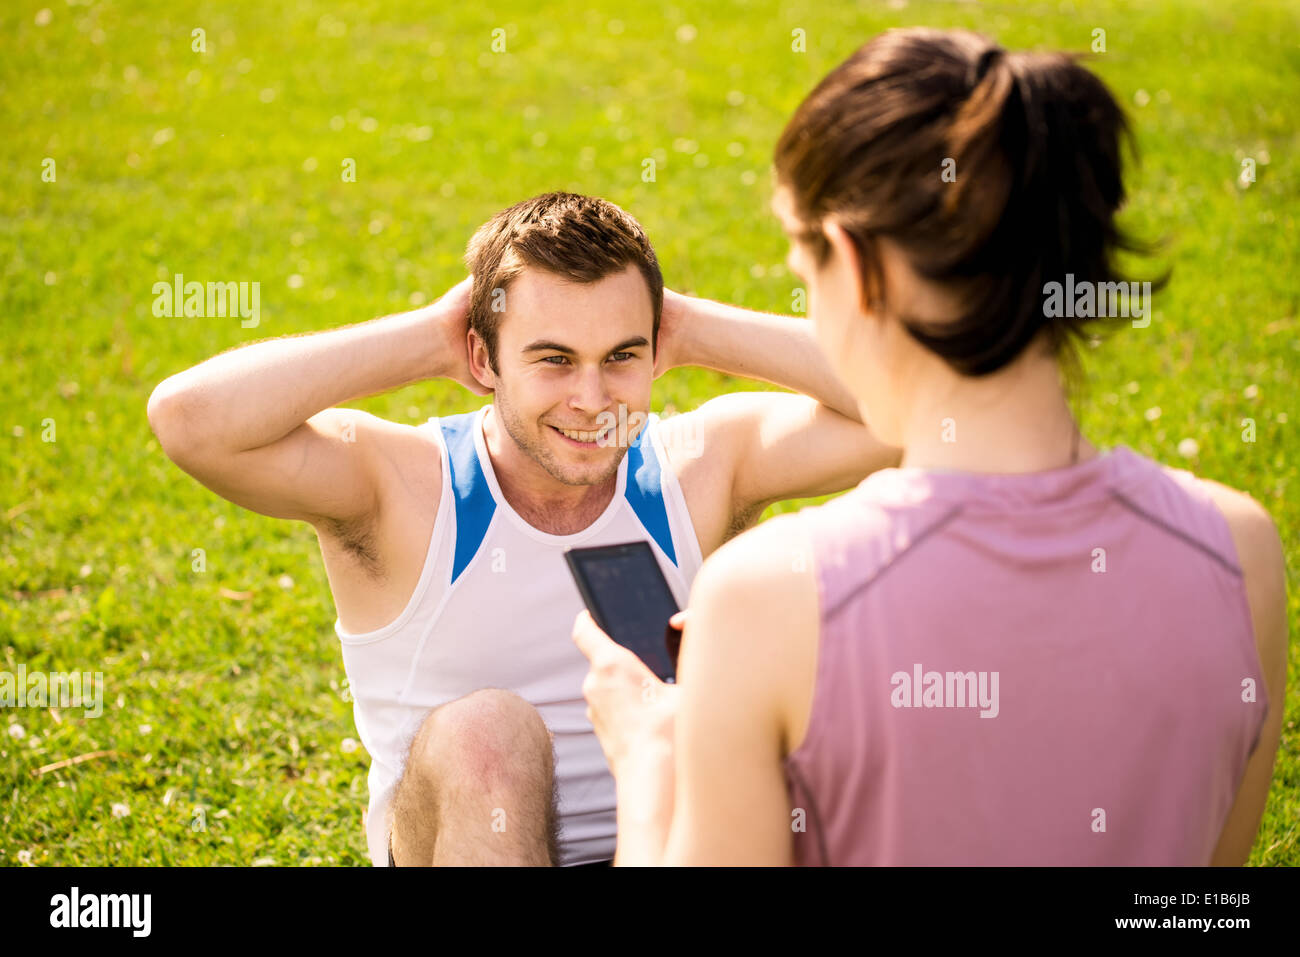 Man making sit-ups while woman is watching time of exercise on mobile phone Stock Photo